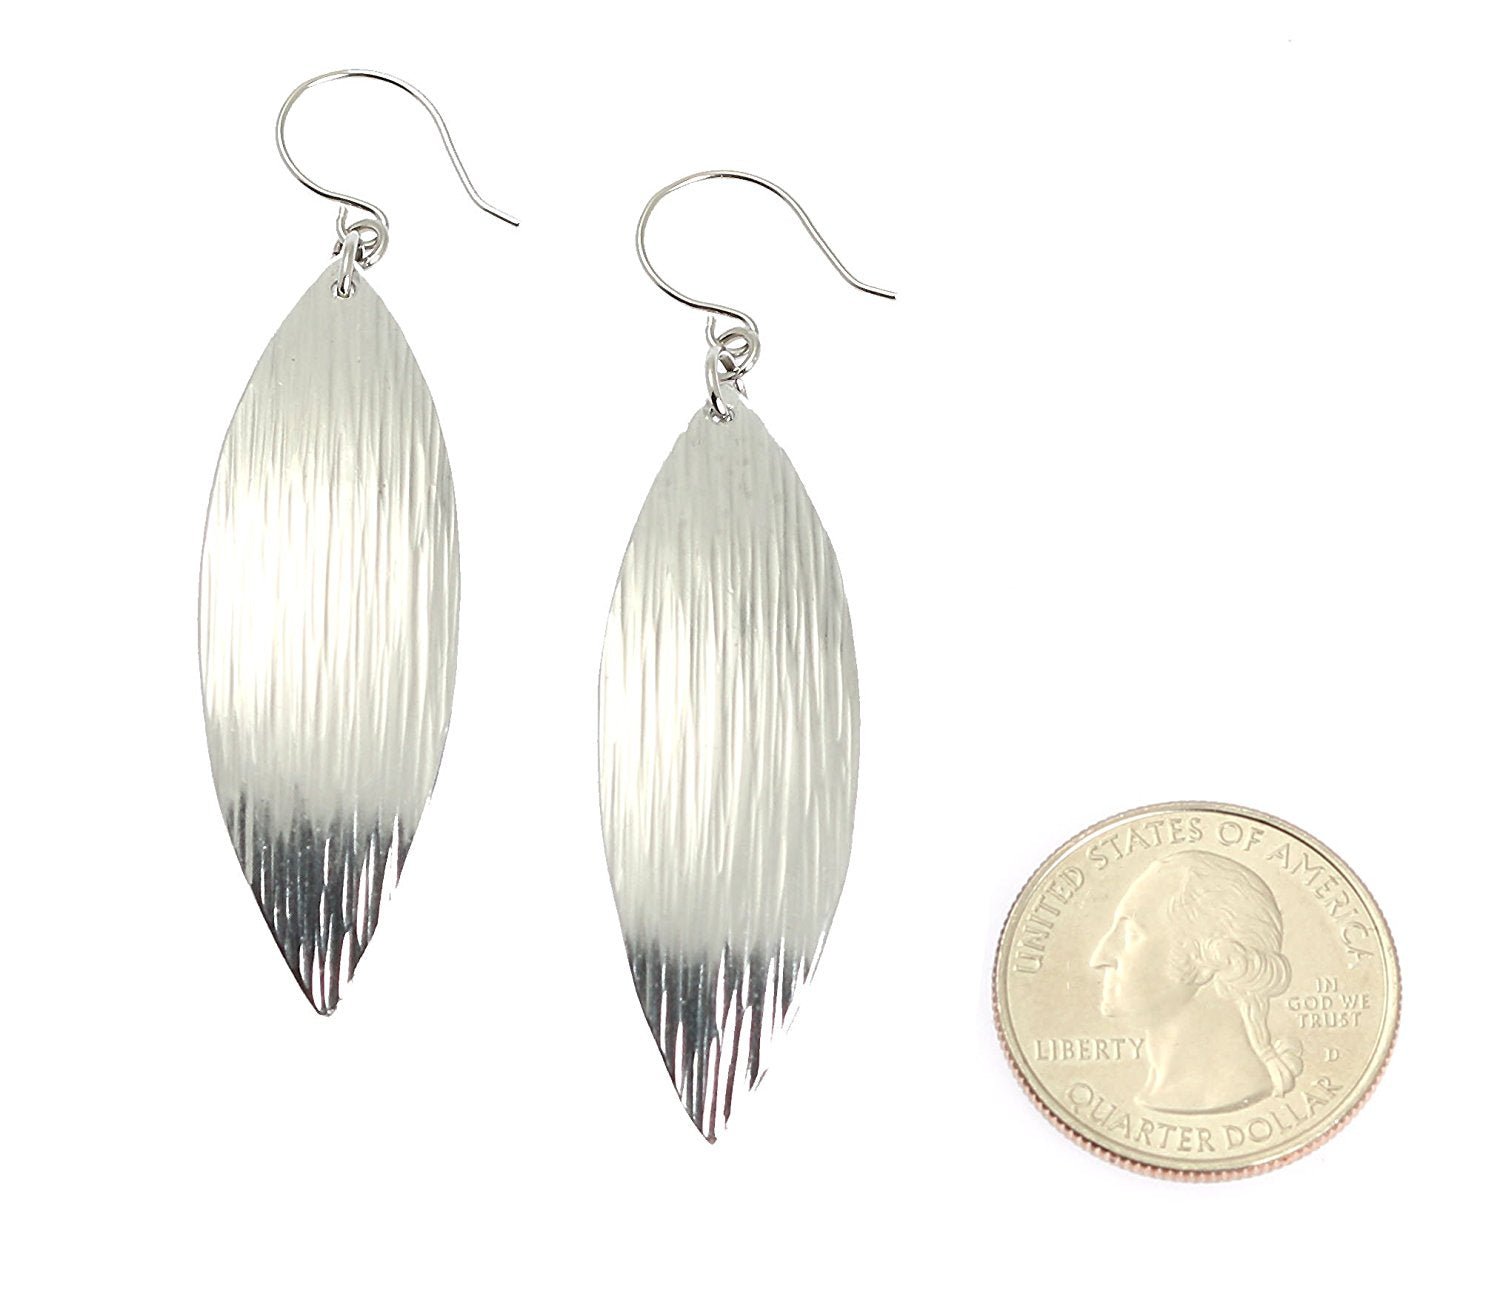 Size of Chased Aluminum Leaf Drop Earrings